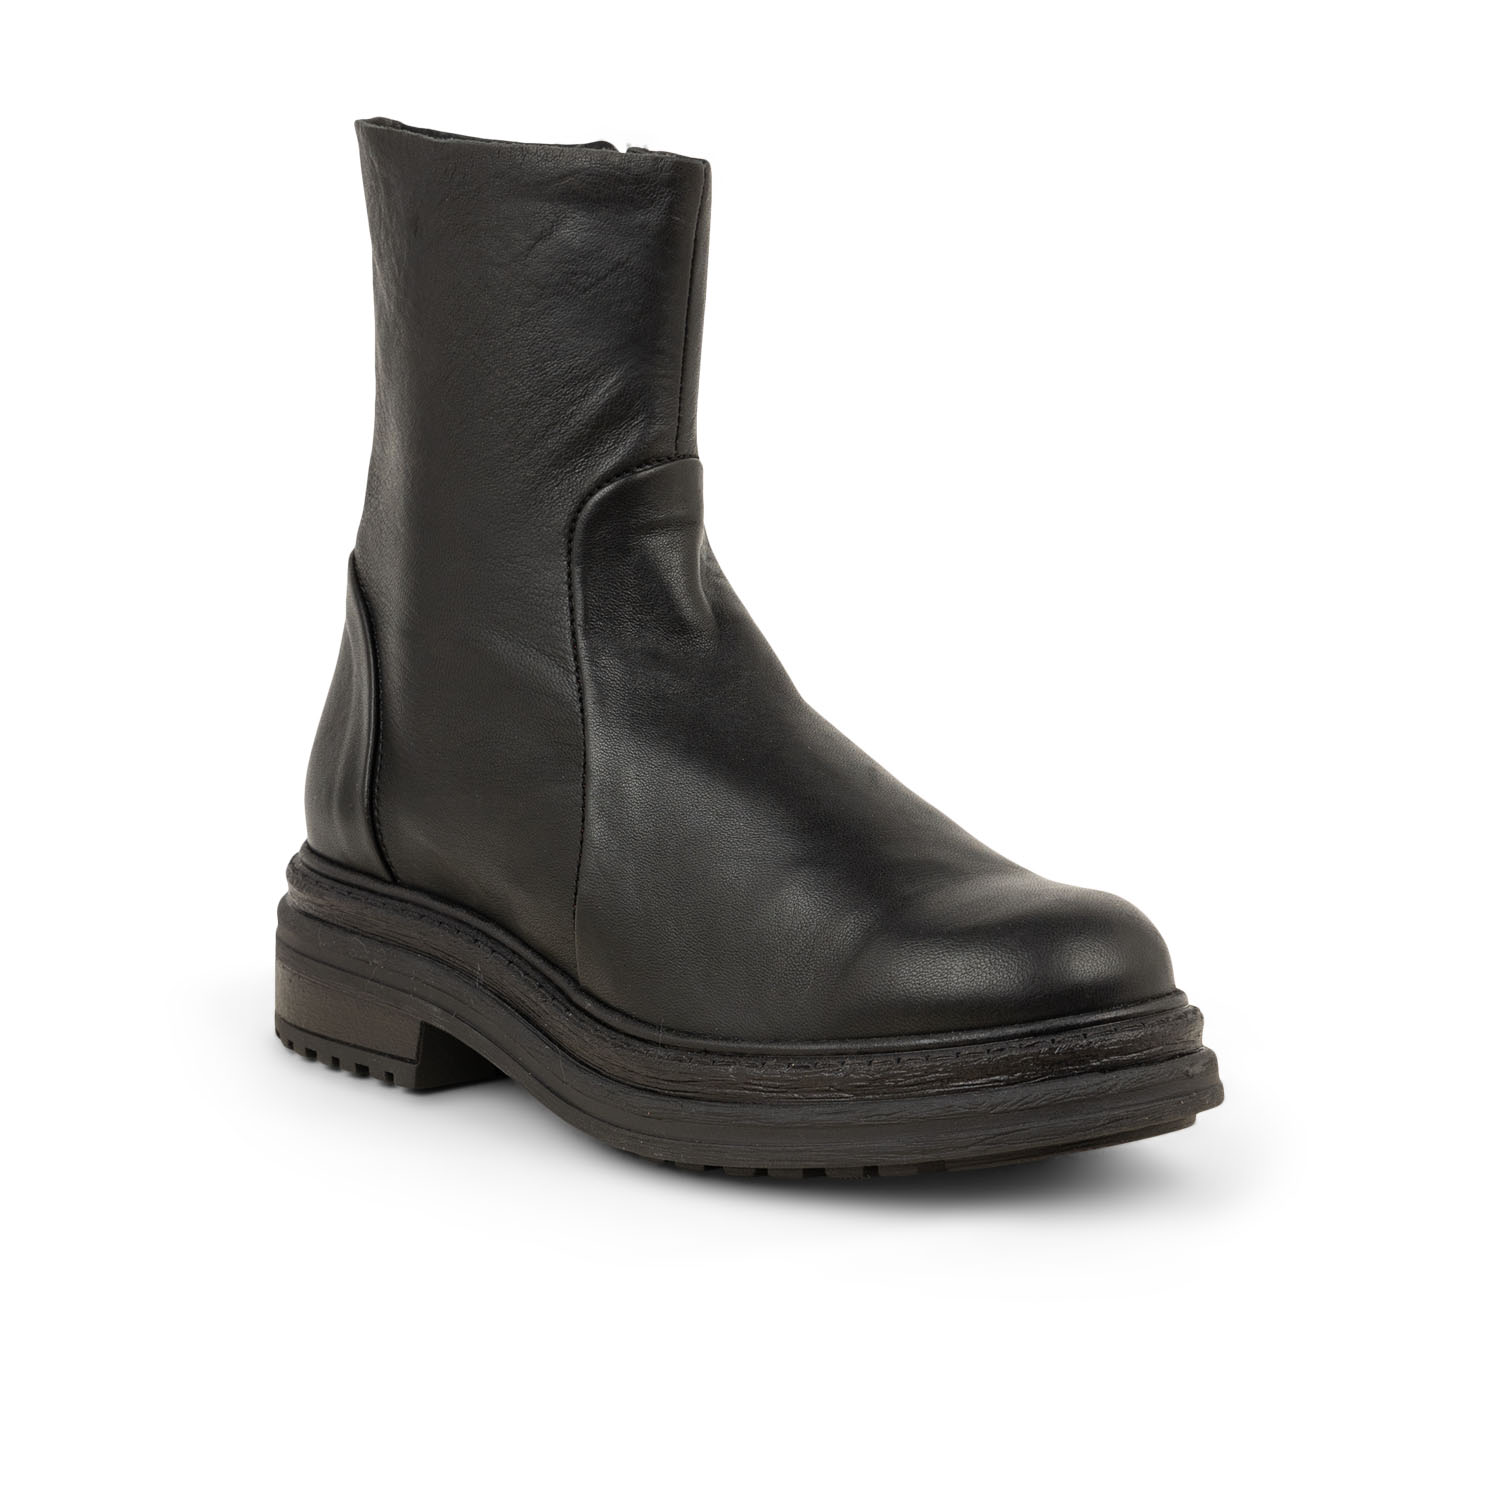 02 - PULLY - ALIWELL - Boots et bottines - Cuir